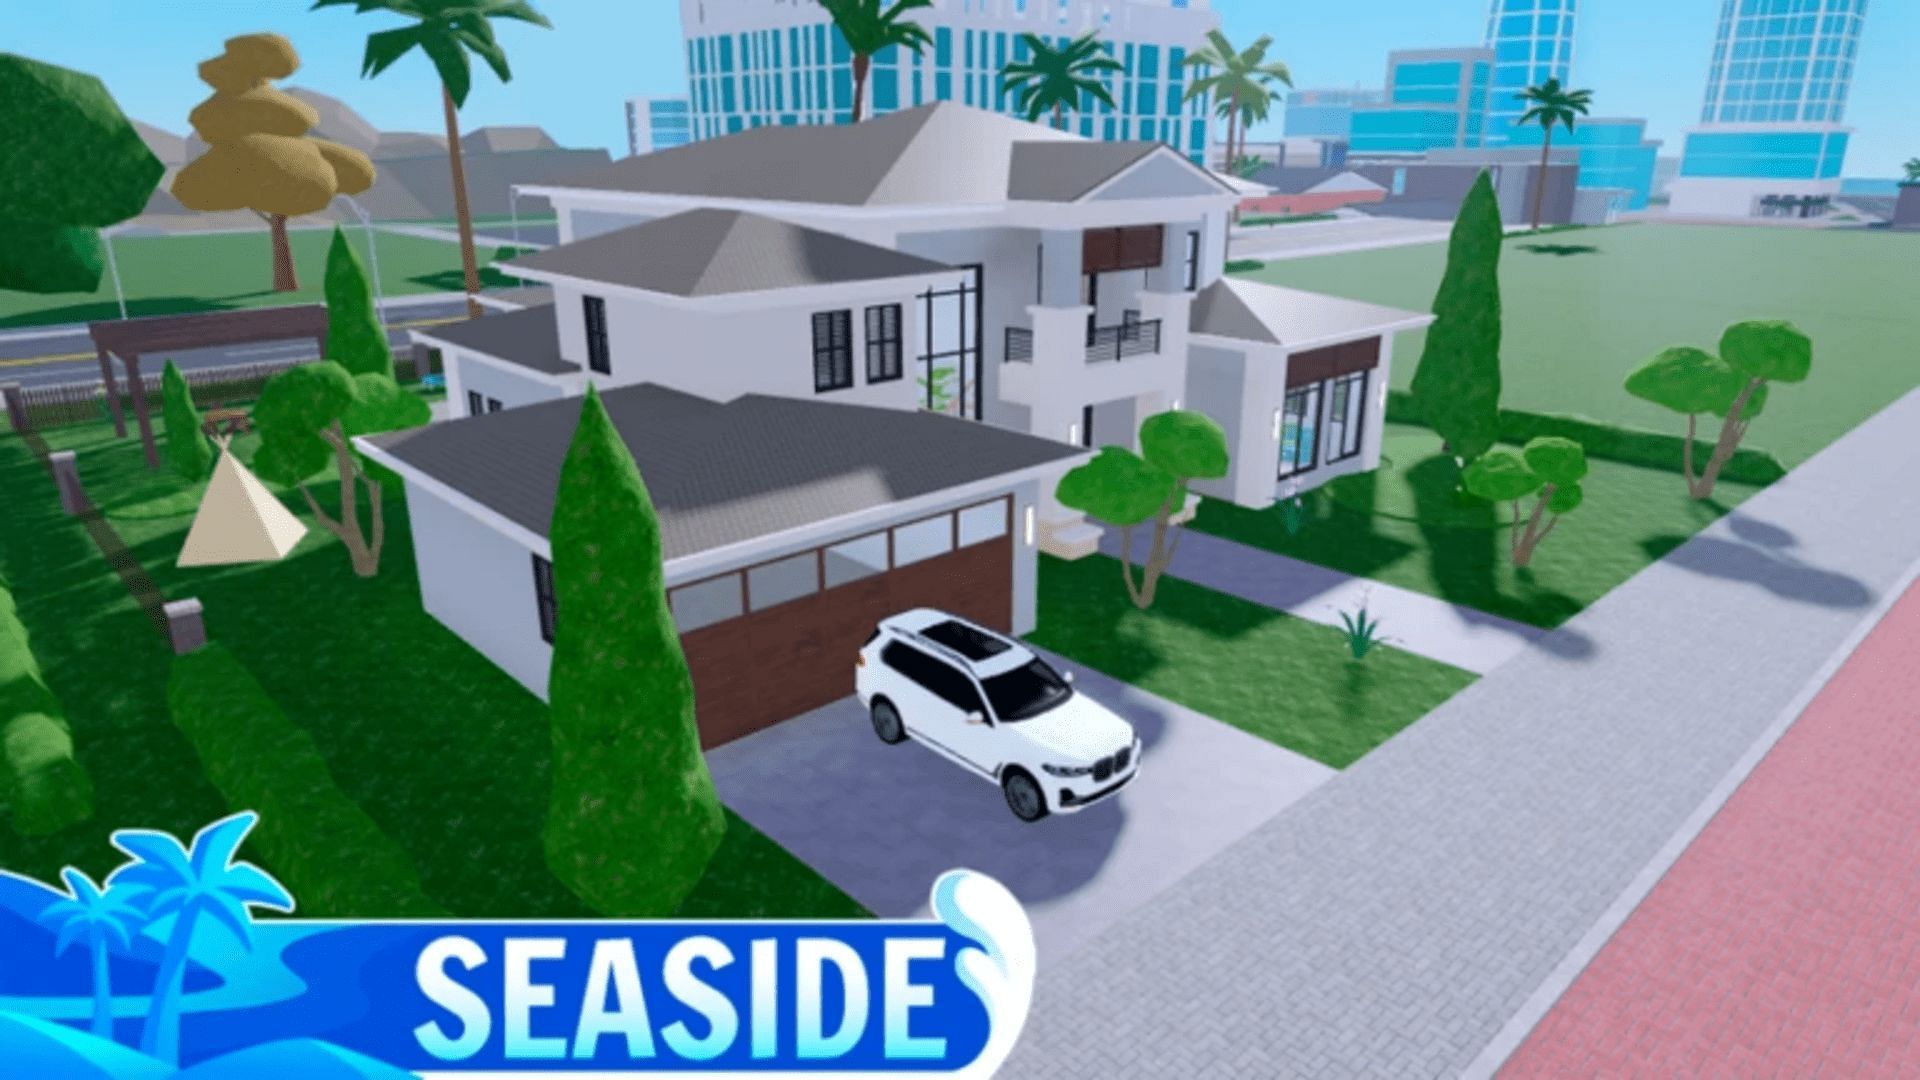 Official cover for Seaside RP (Image via Roblox)